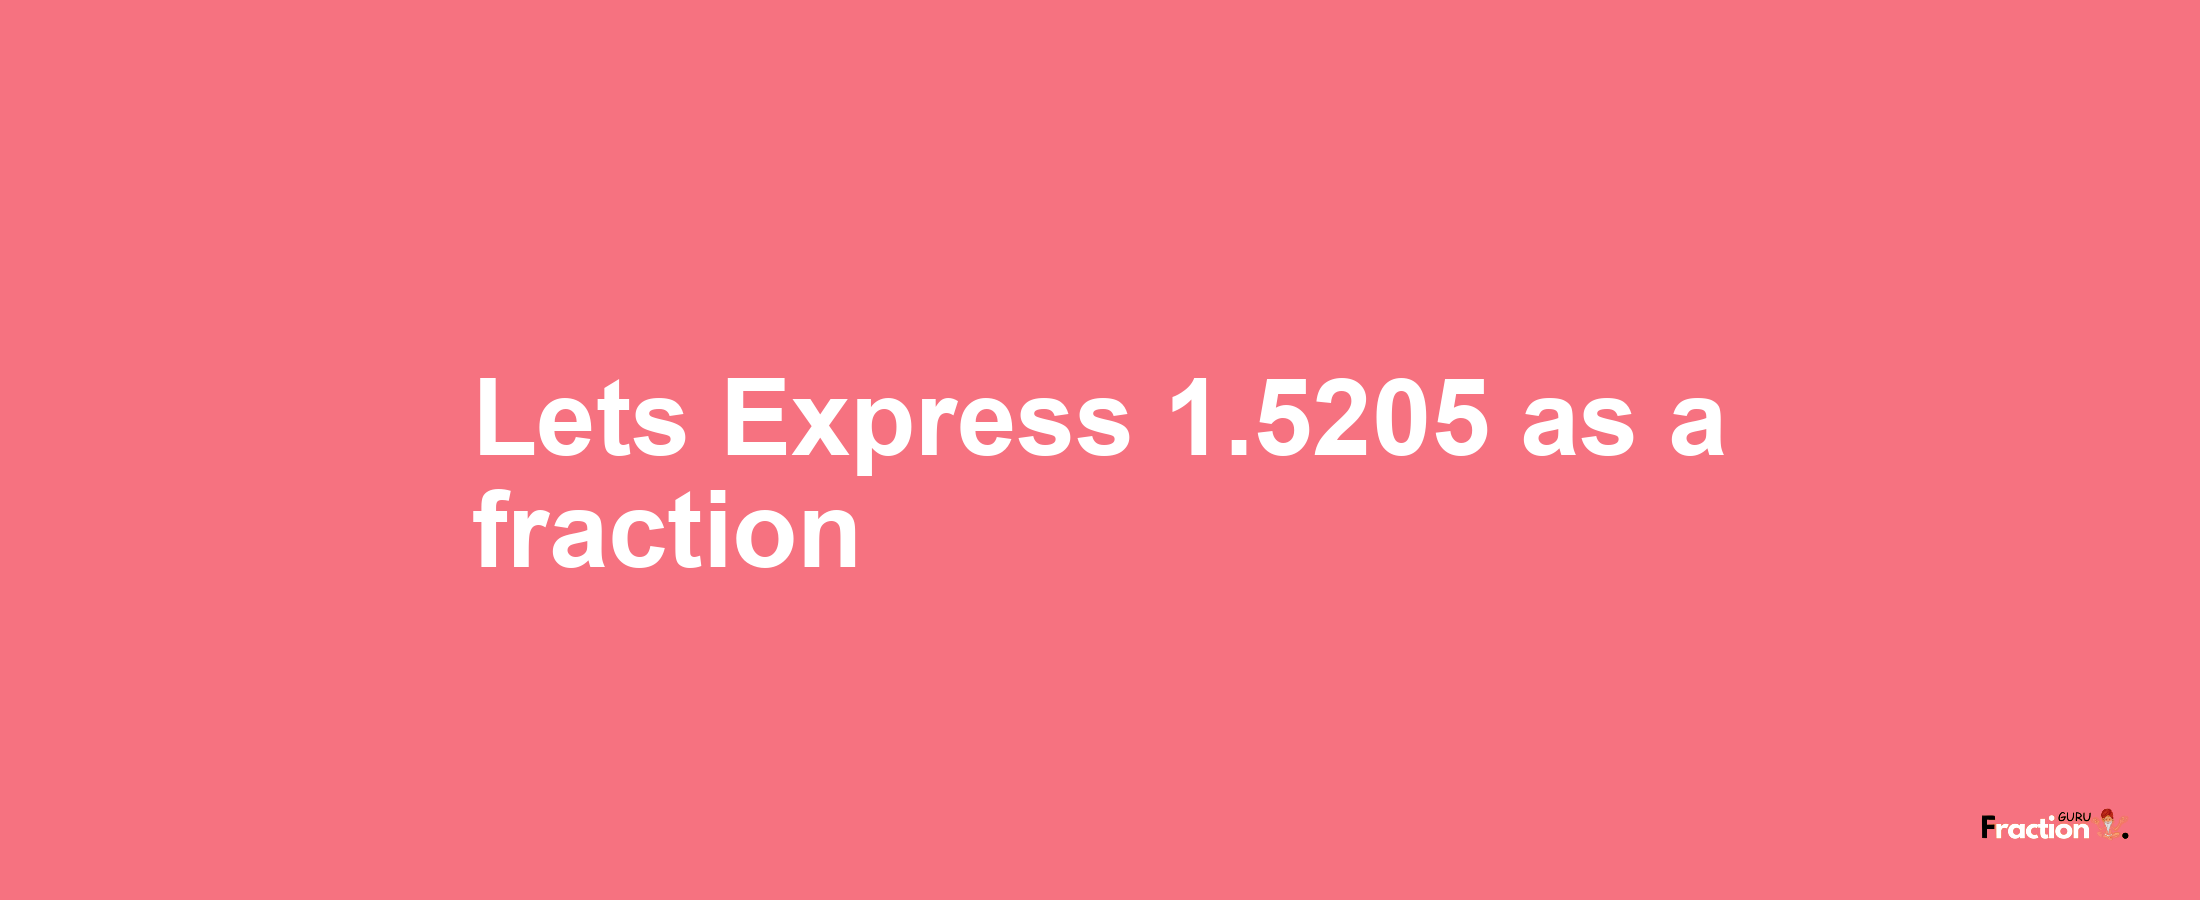 Lets Express 1.5205 as afraction